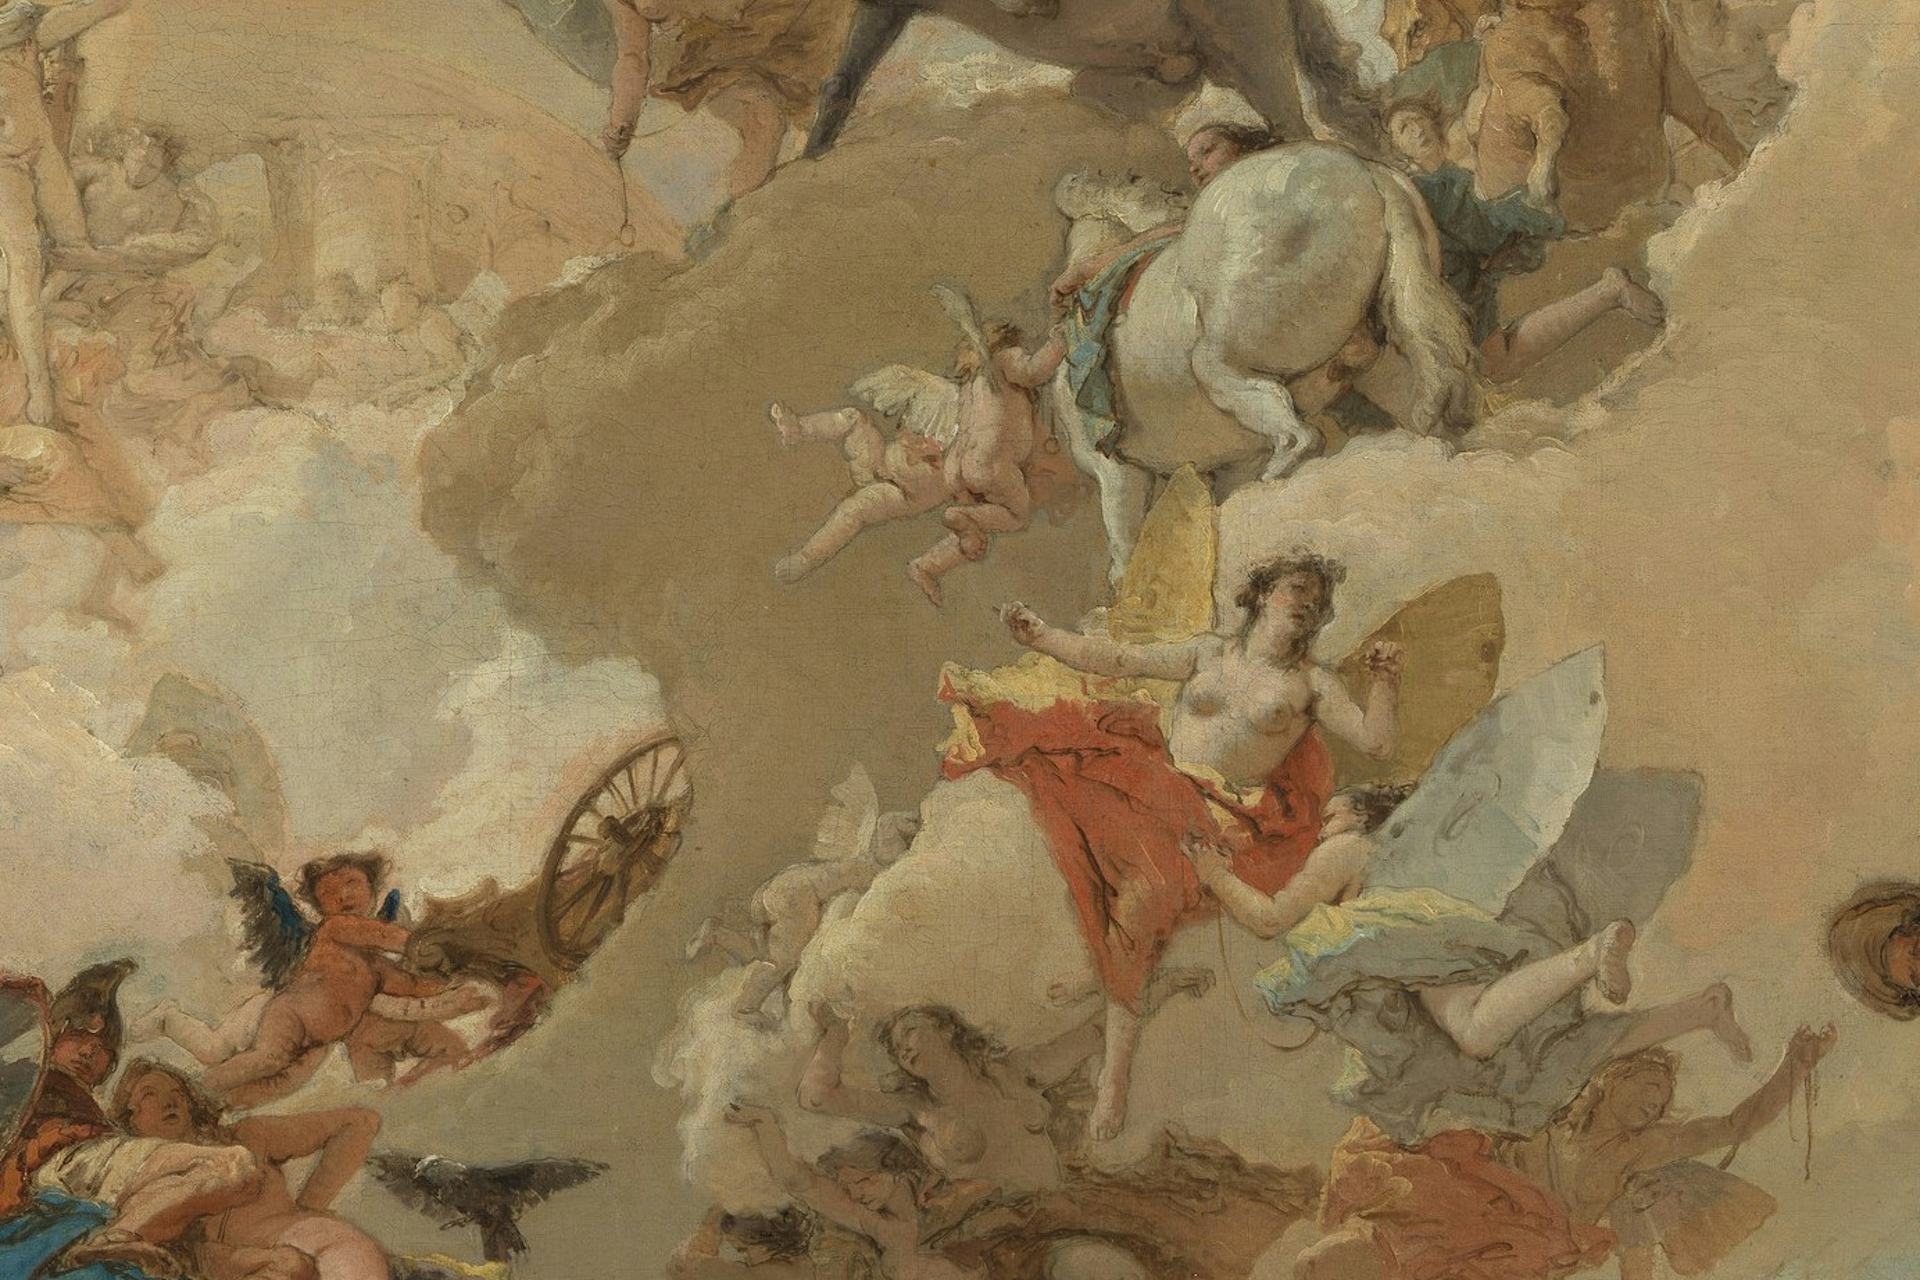 Detail from Allegory of the Planets and Continents by Giovanni Battista Tiepolo